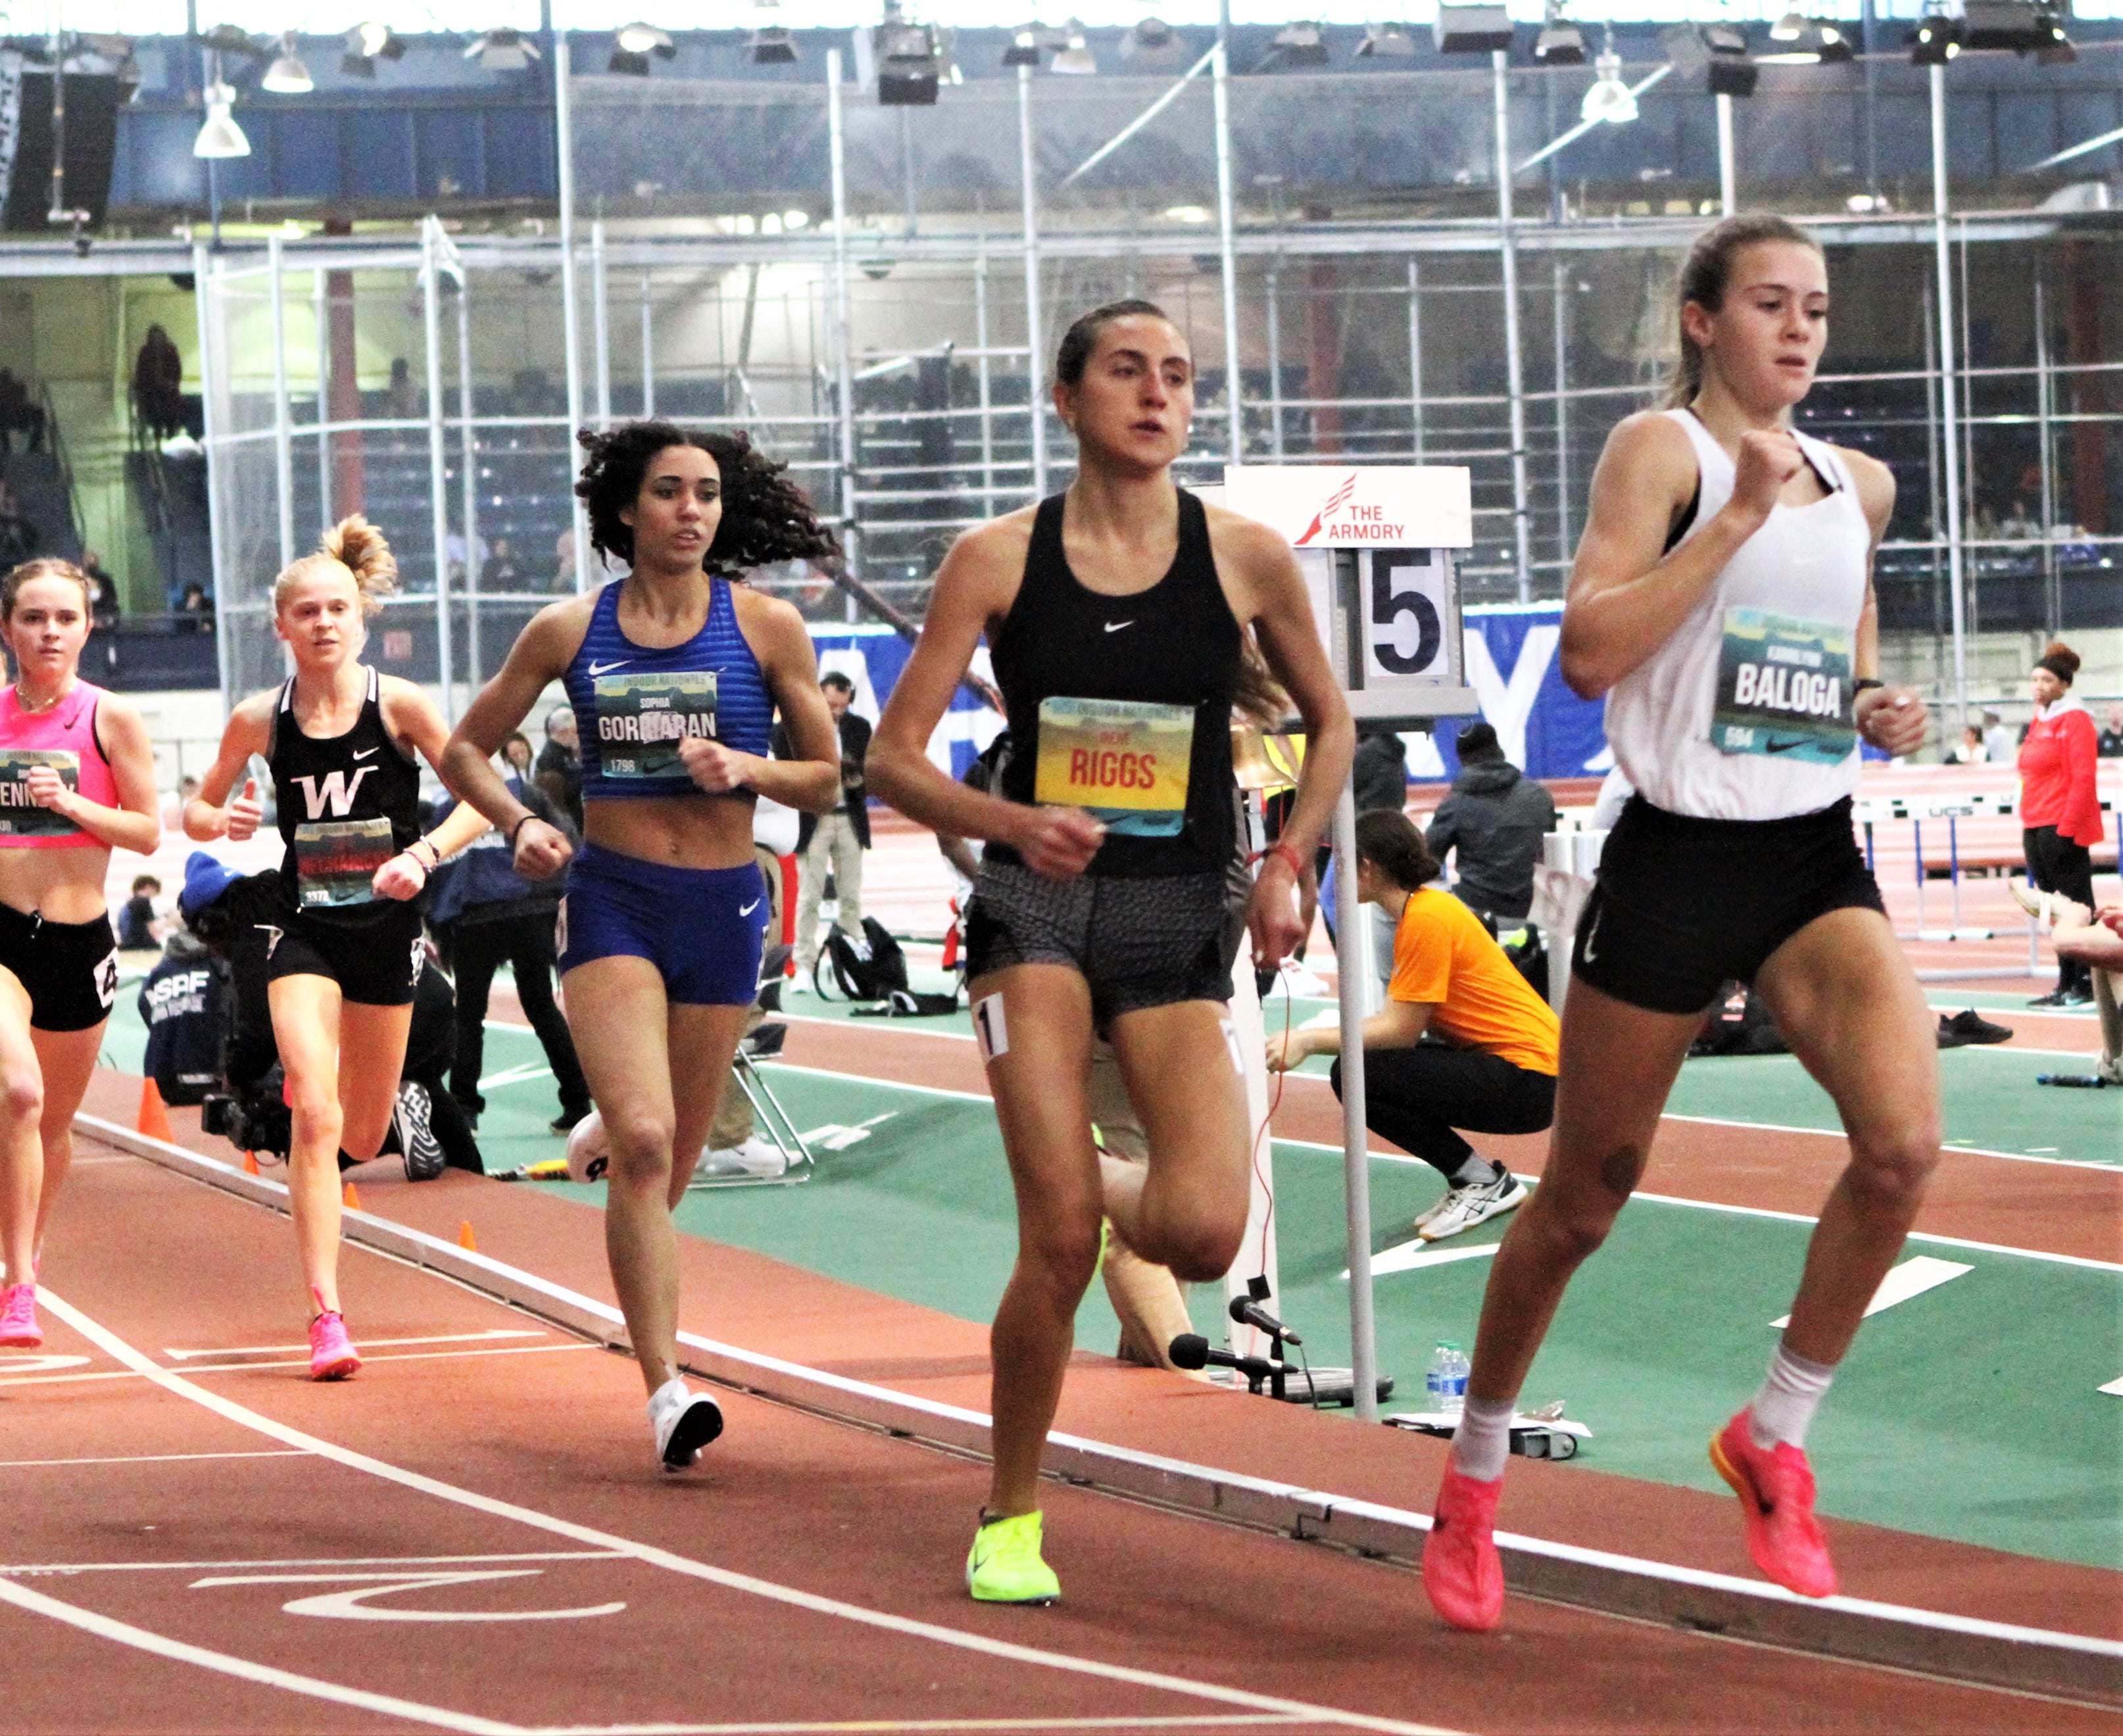 Nike Indoor Track Nationals: Baloga, Negrete silver personal bests